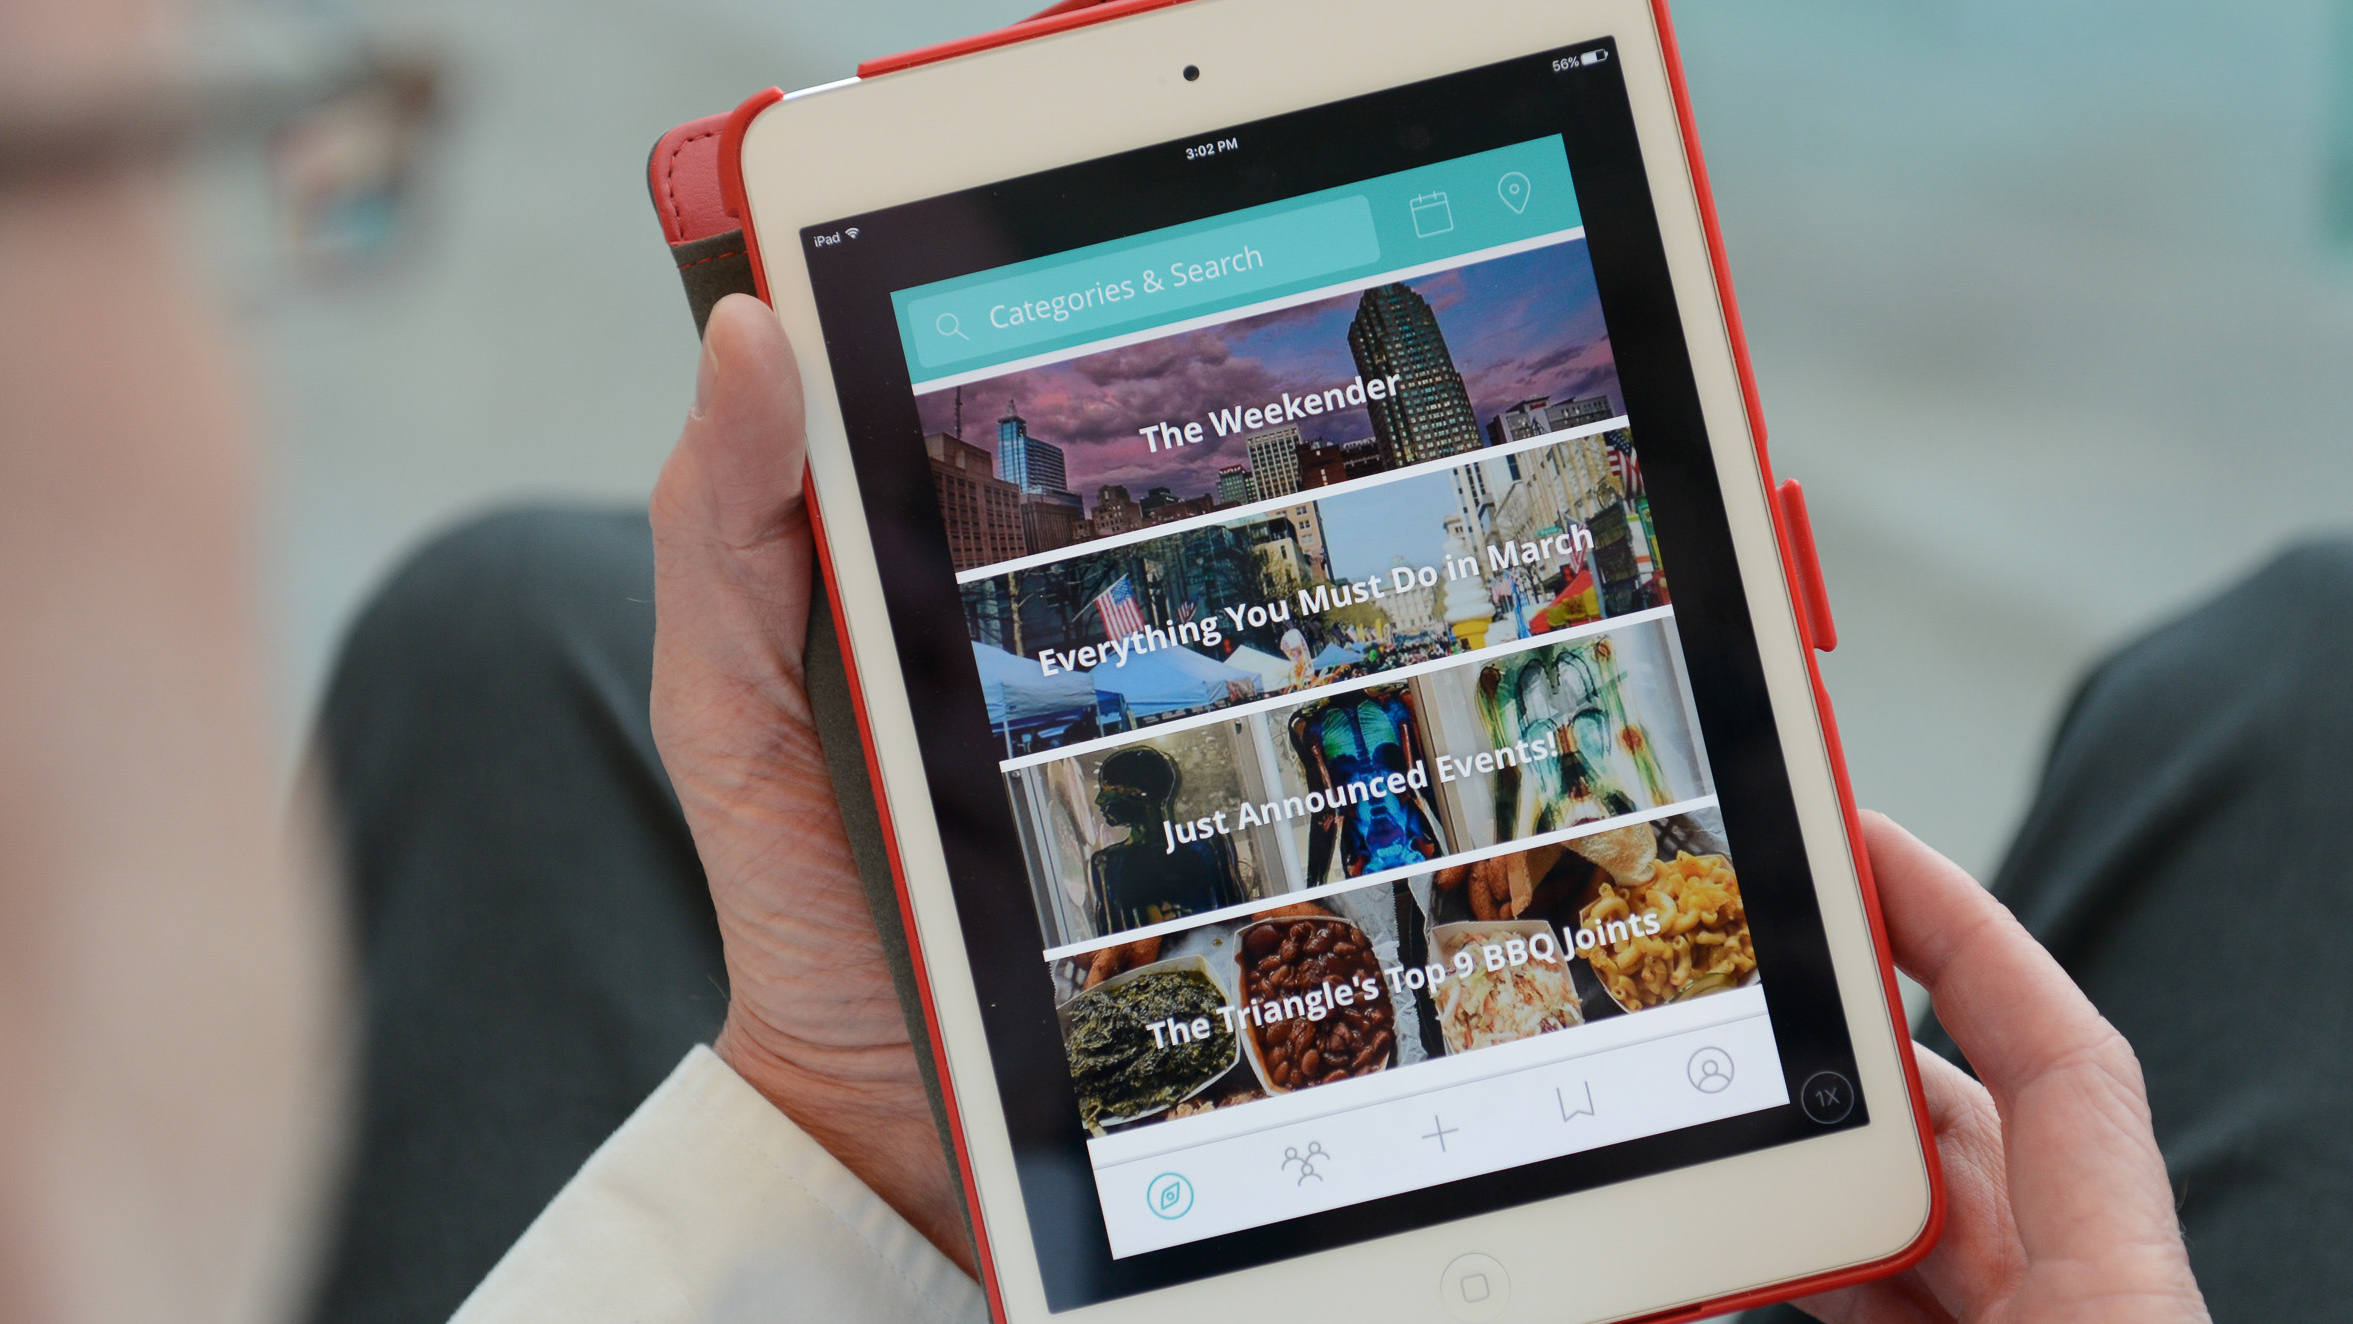 The Offline app allows users to find curated events and activities in their city.